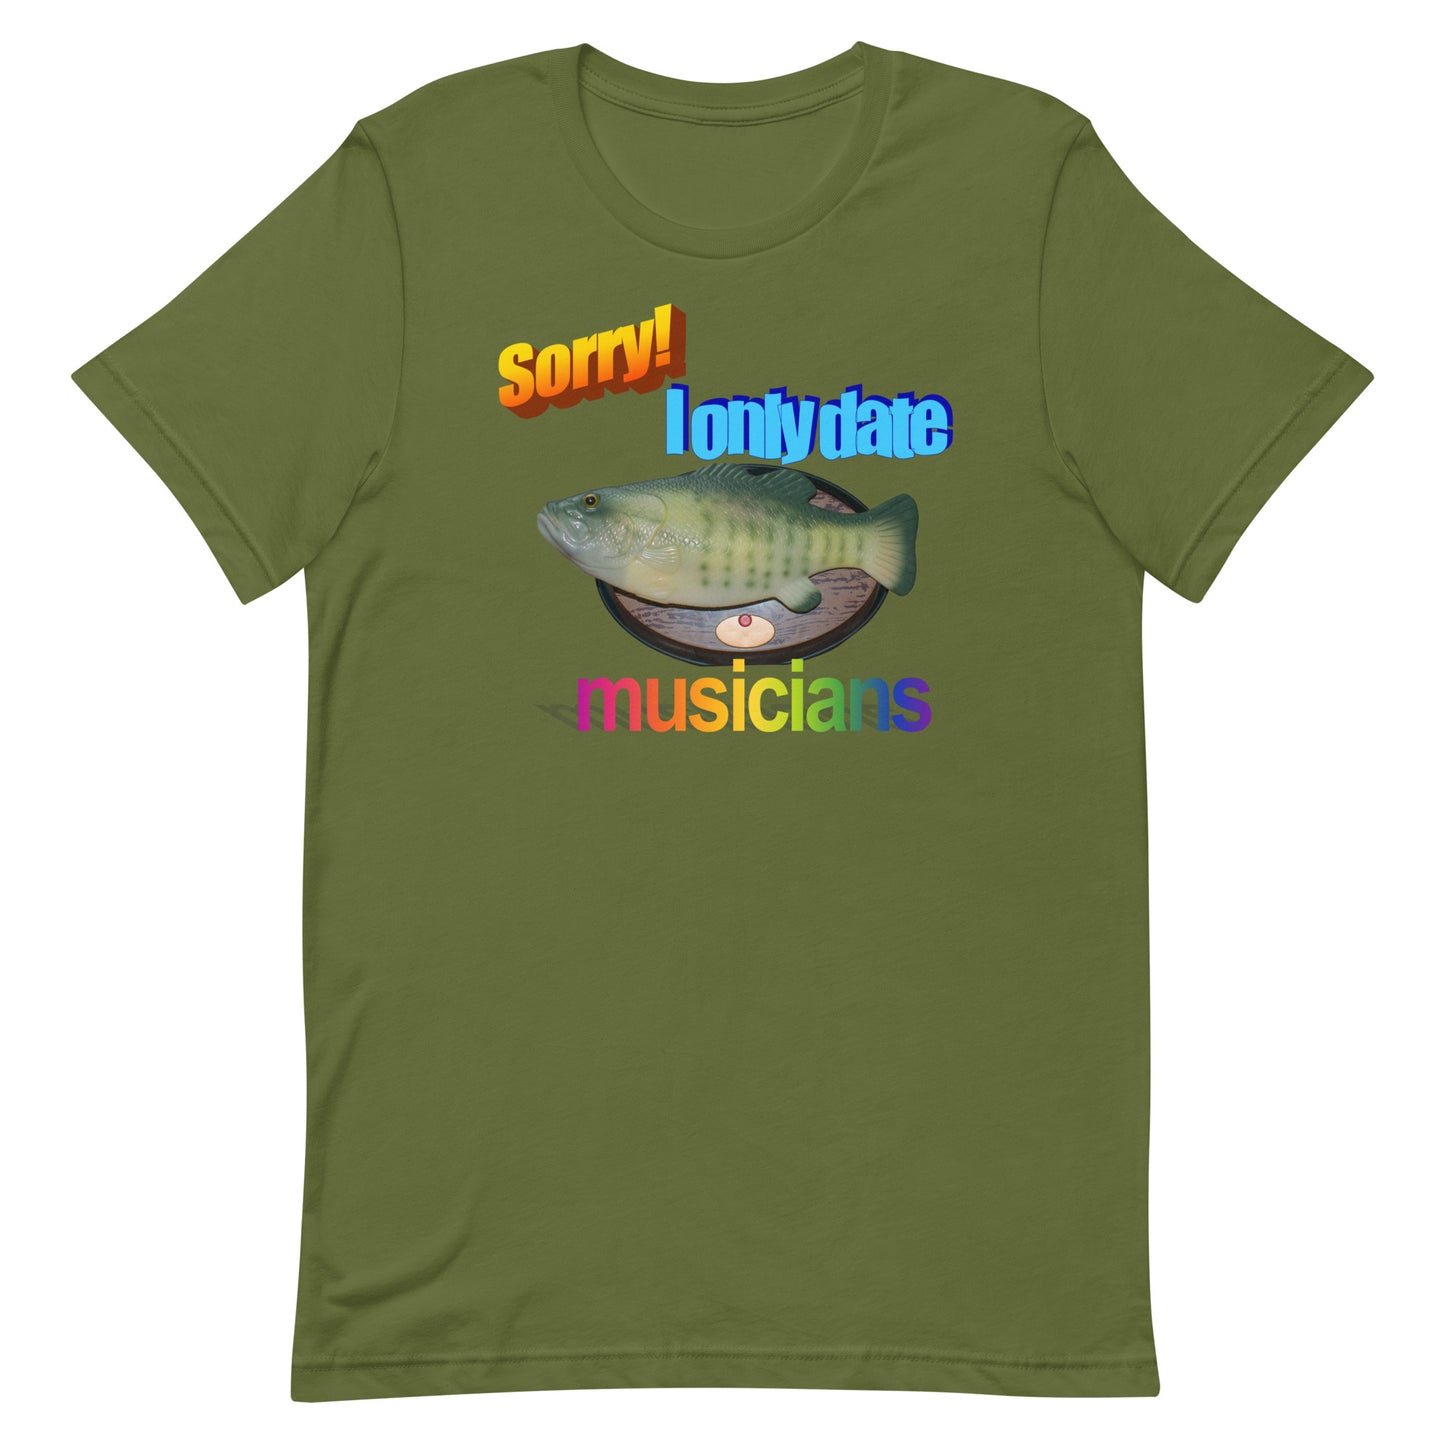 Sorry I Only Date Musicians Unisex t-shirt